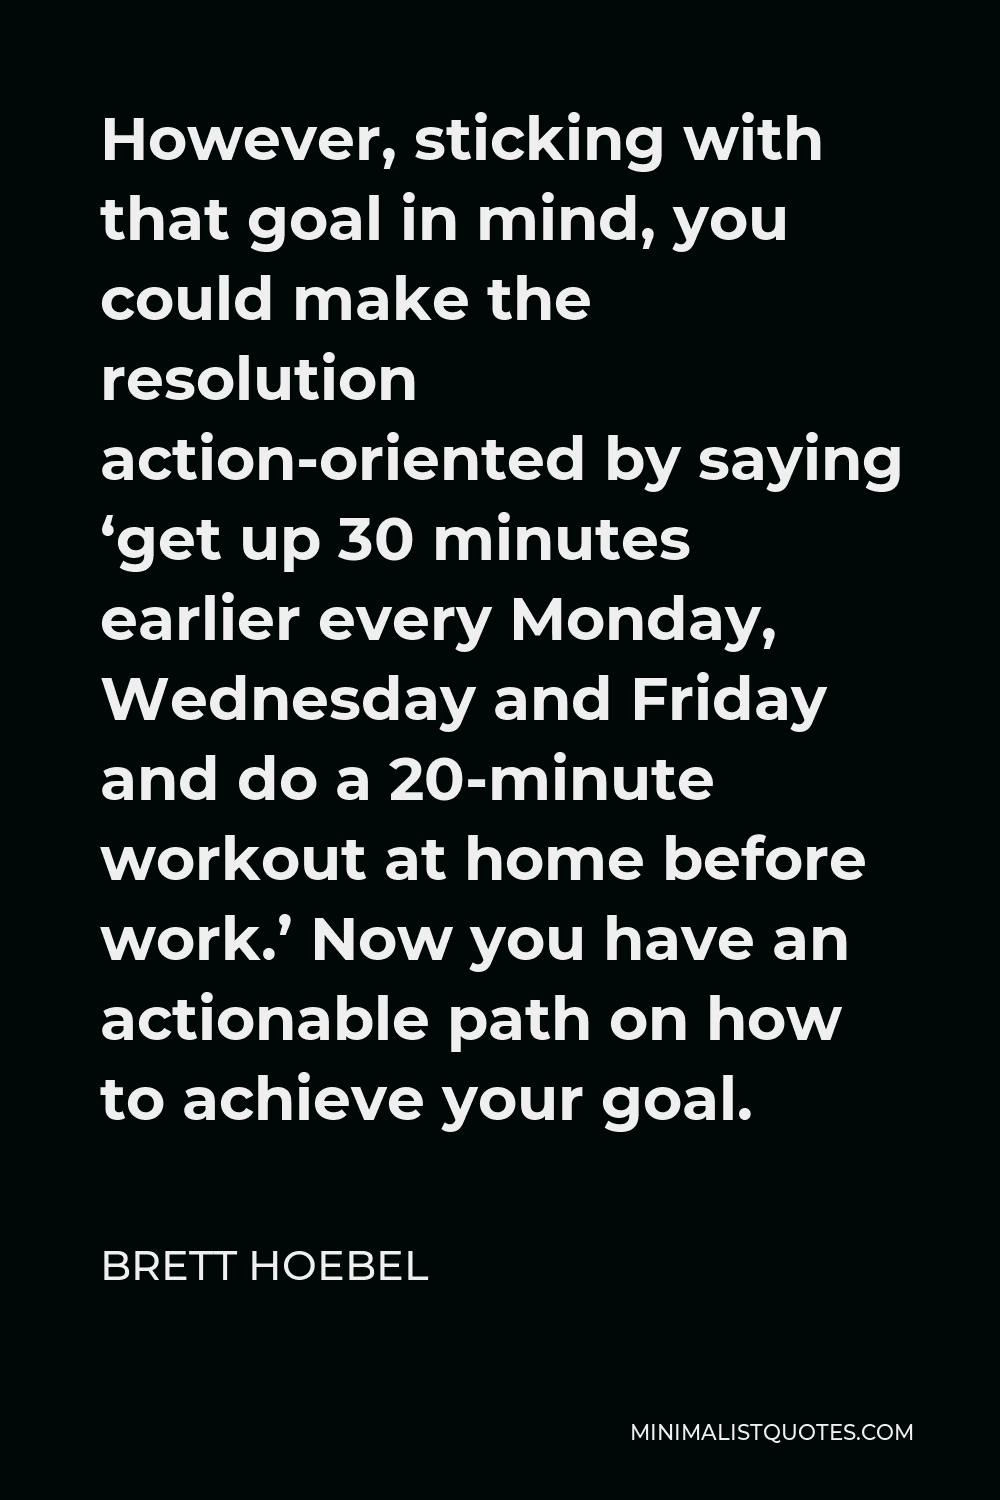 Brett Hoebel Quote - However, sticking with that goal in mind, you could make the resolution action-oriented by saying ‘get up 30 minutes earlier every Monday, Wednesday and Friday and do a 20-minute workout at home before work.’ Now you have an actionable path on how to achieve your goal.